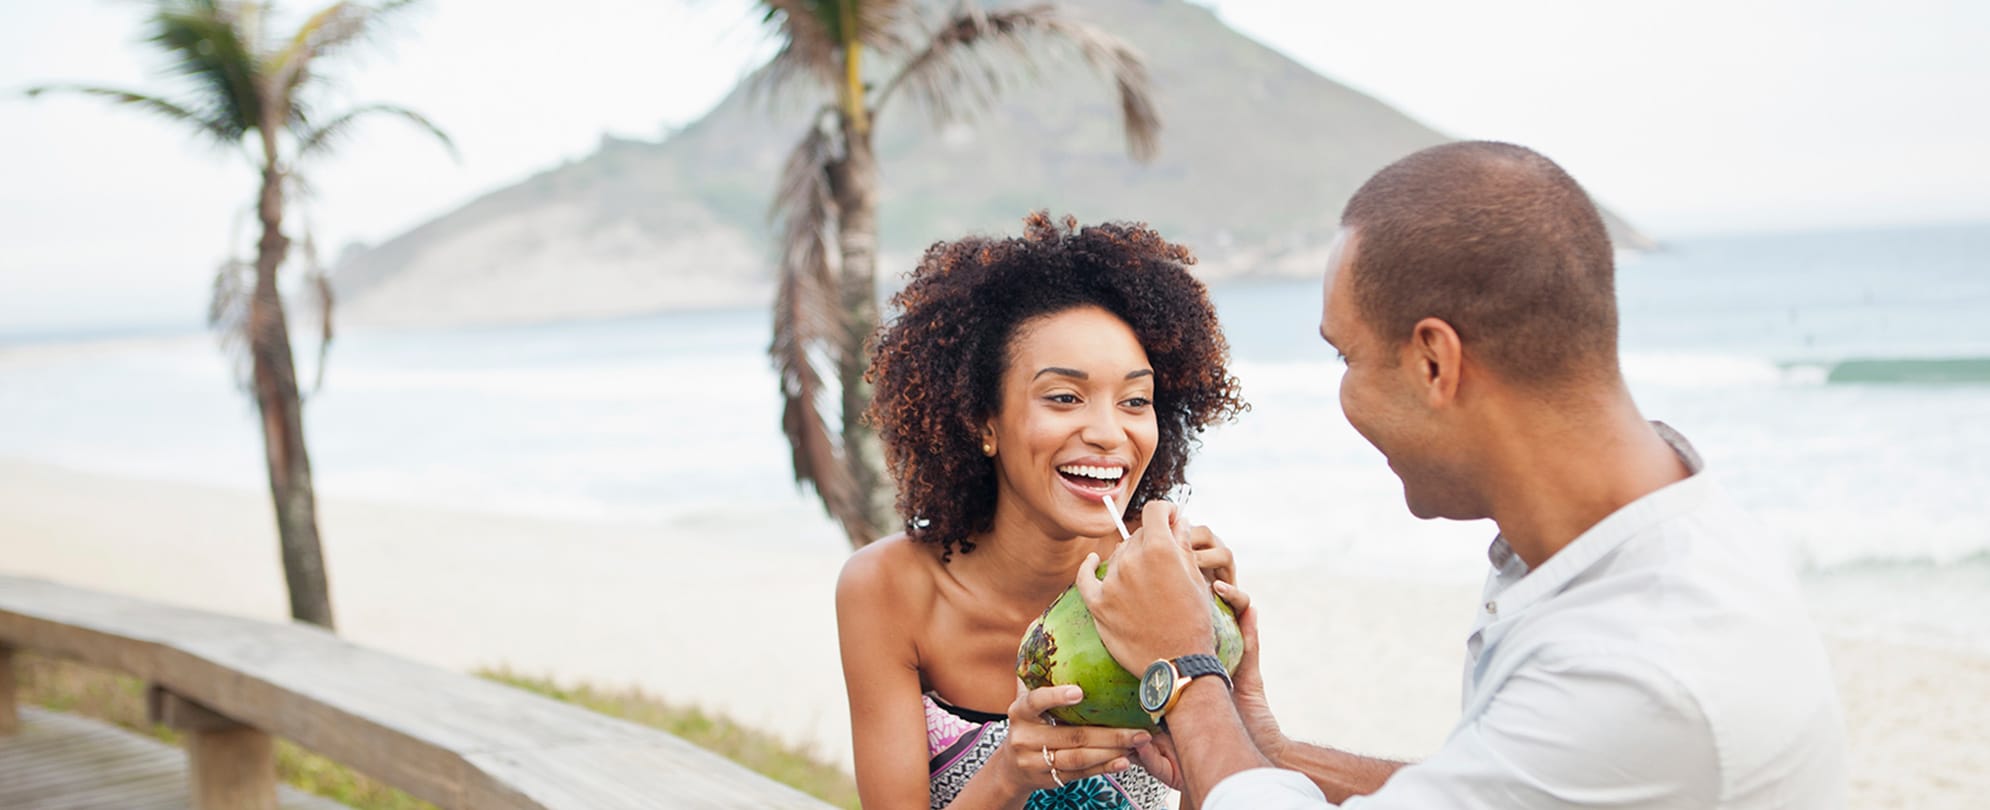 A man is holding a straw inside a coconut for the woman standing in front of him to take a sip of the coconut water. 